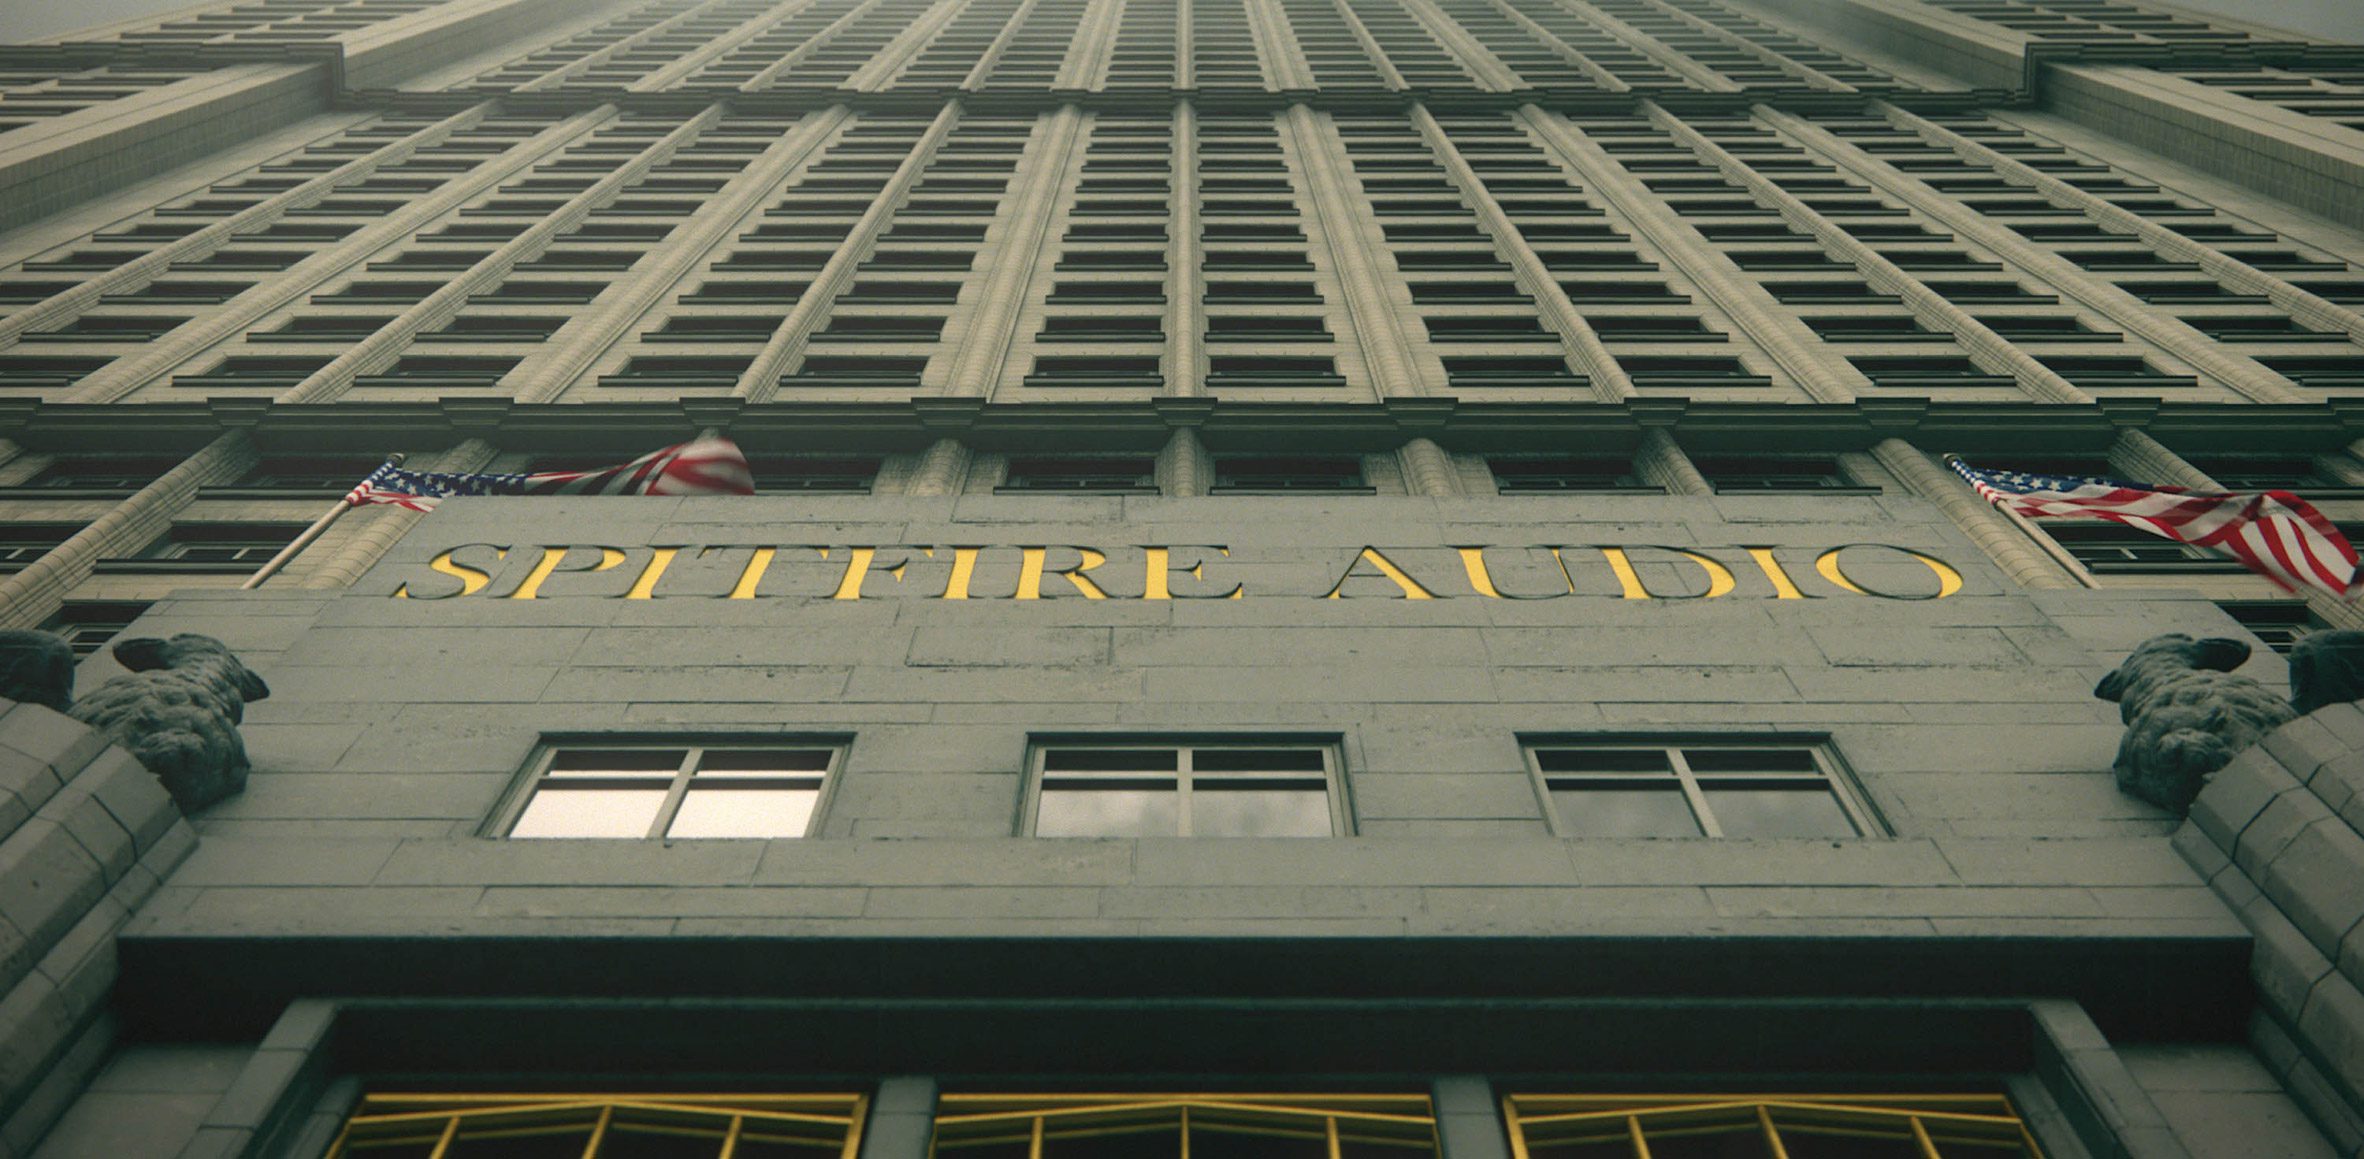 Skyscraper that looks like Empire State Building in Colossus video by Factory Fifteen for Spitfire Audio